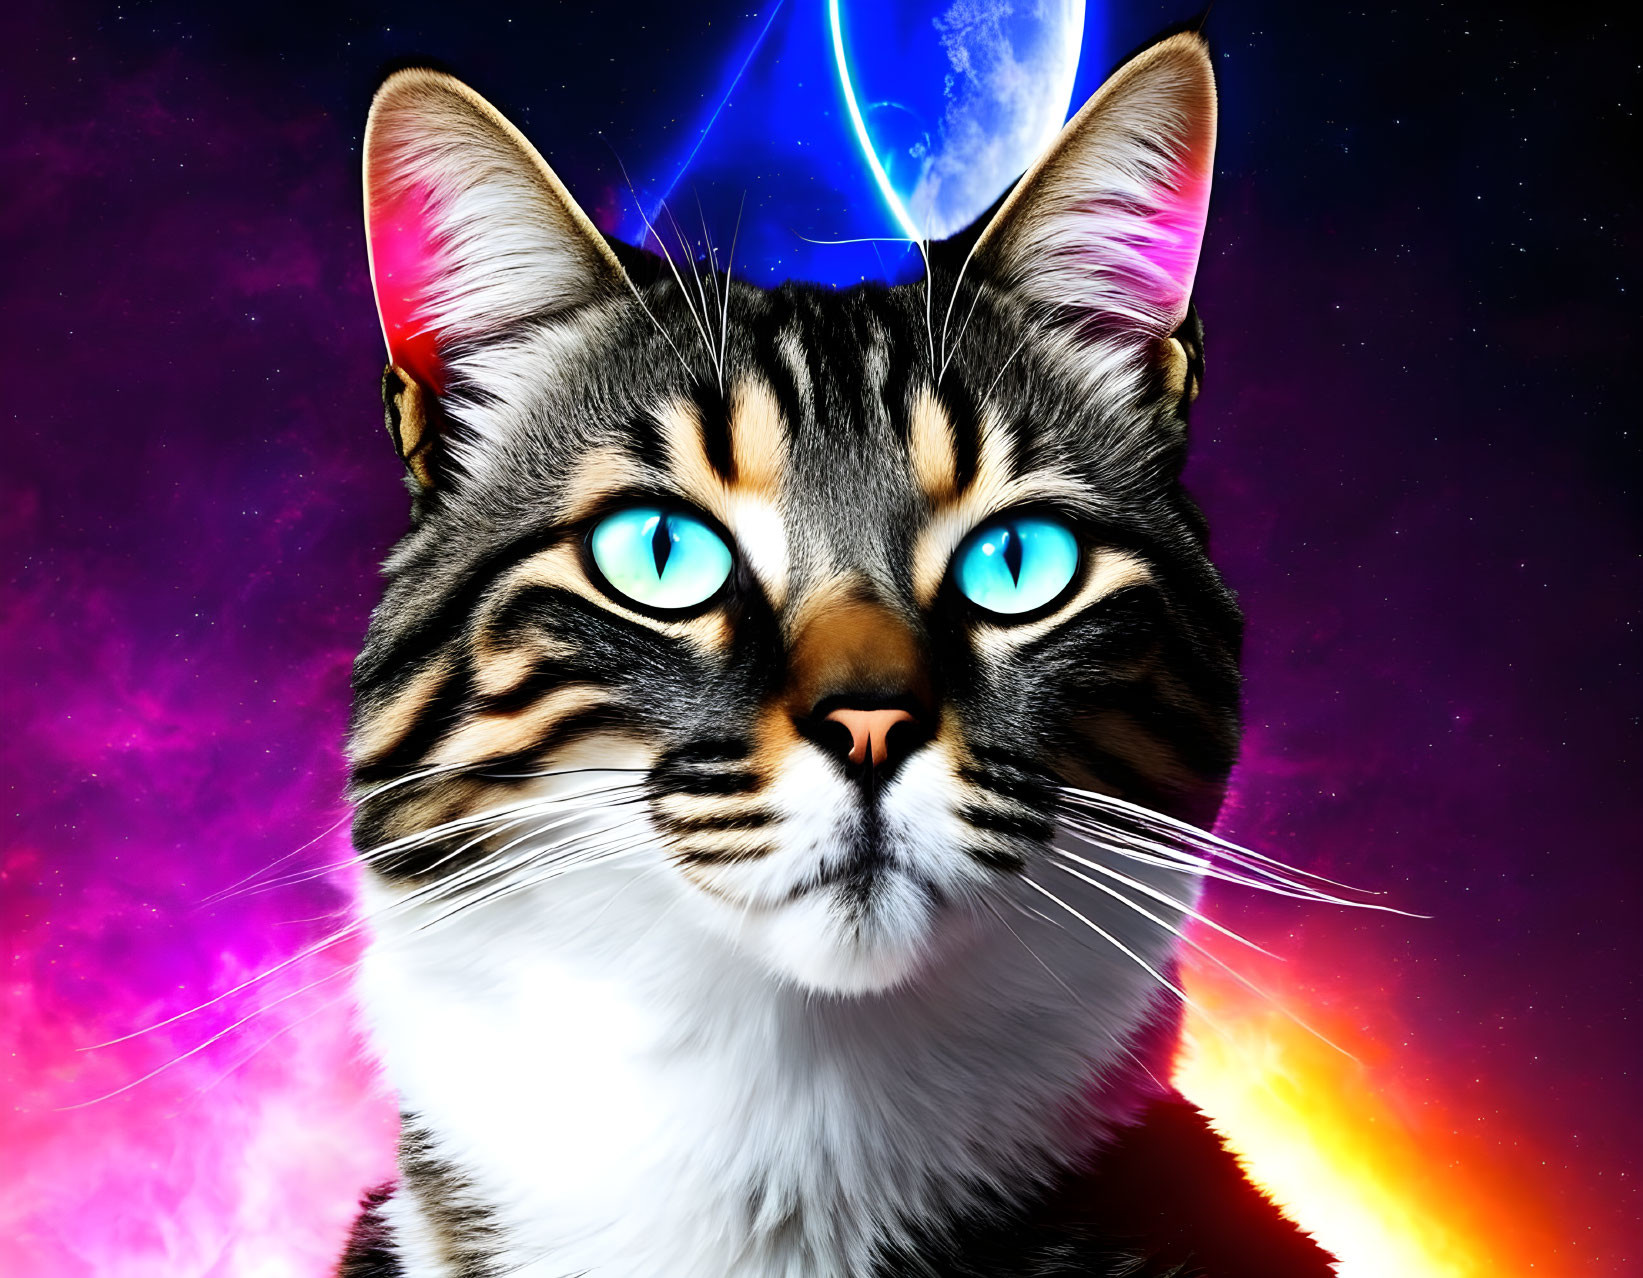 Tabby Cat with Blue Eyes in Cosmic Setting